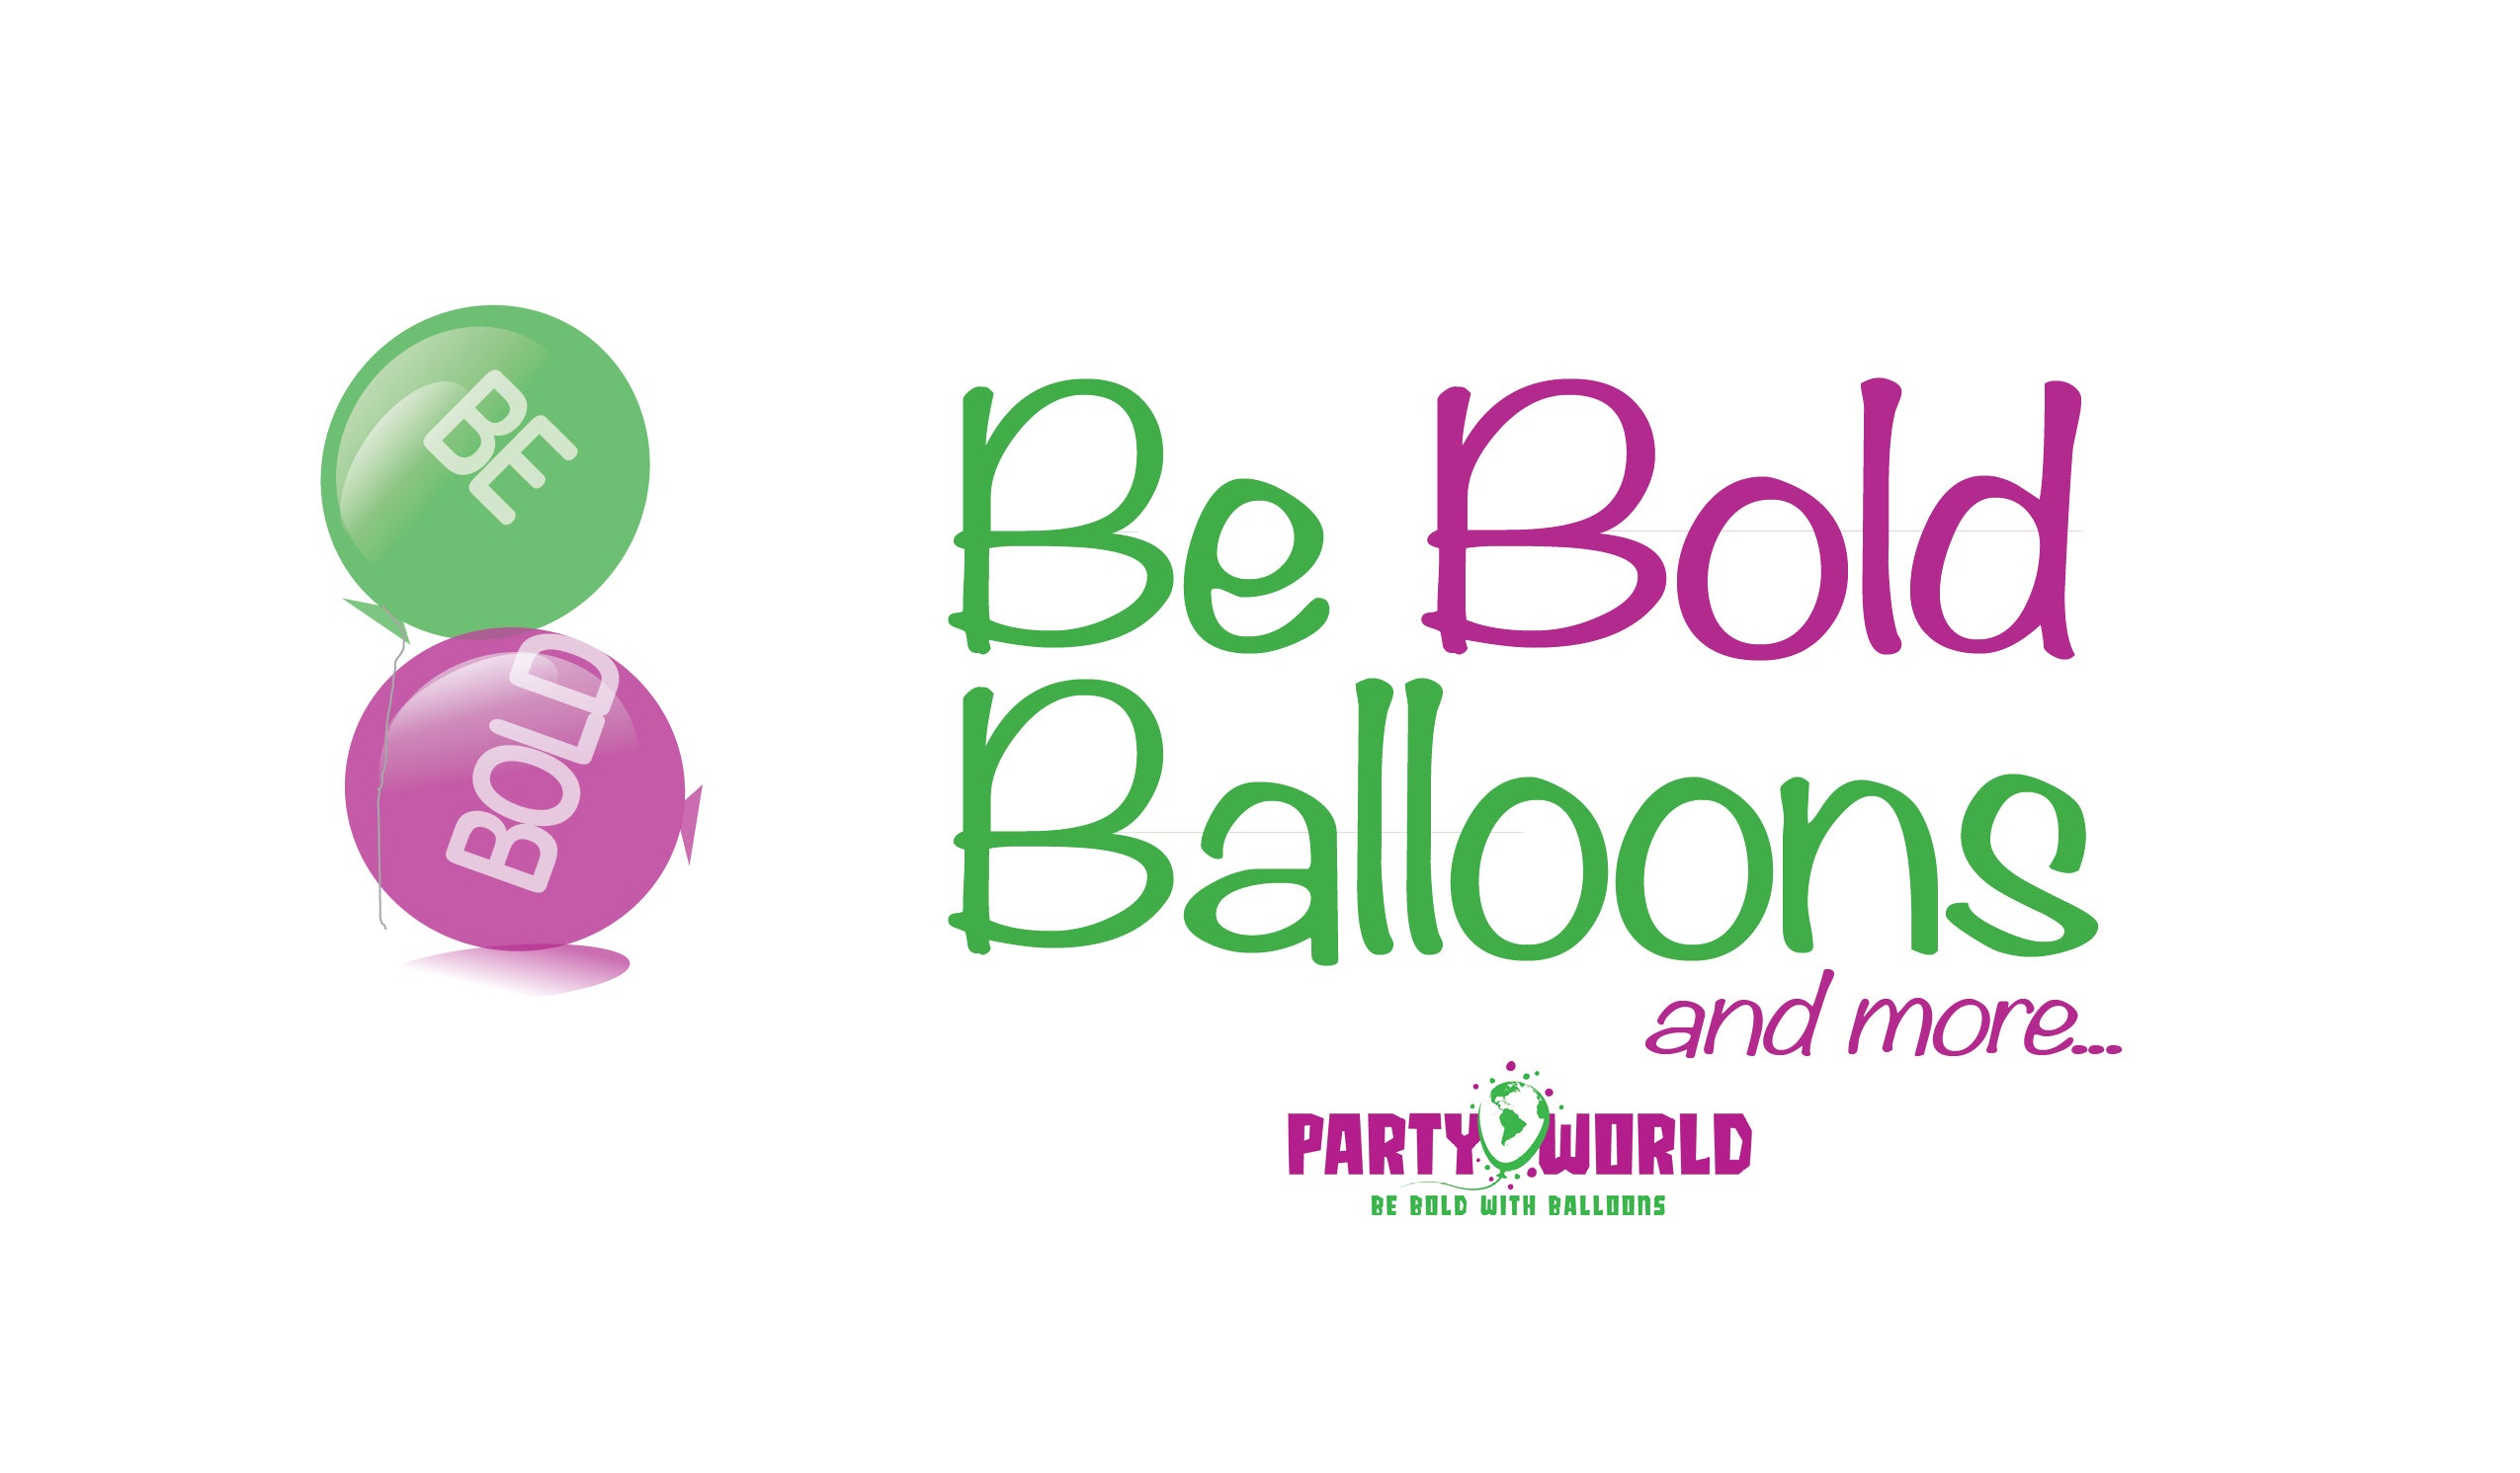 Be Bold Balloons  Brainerd, Baxter, Nisswa, Crosslake, Pillager, Crosby, Aitkin, Pine River, Pequot Lakes, Little Falls, Breezy Point.